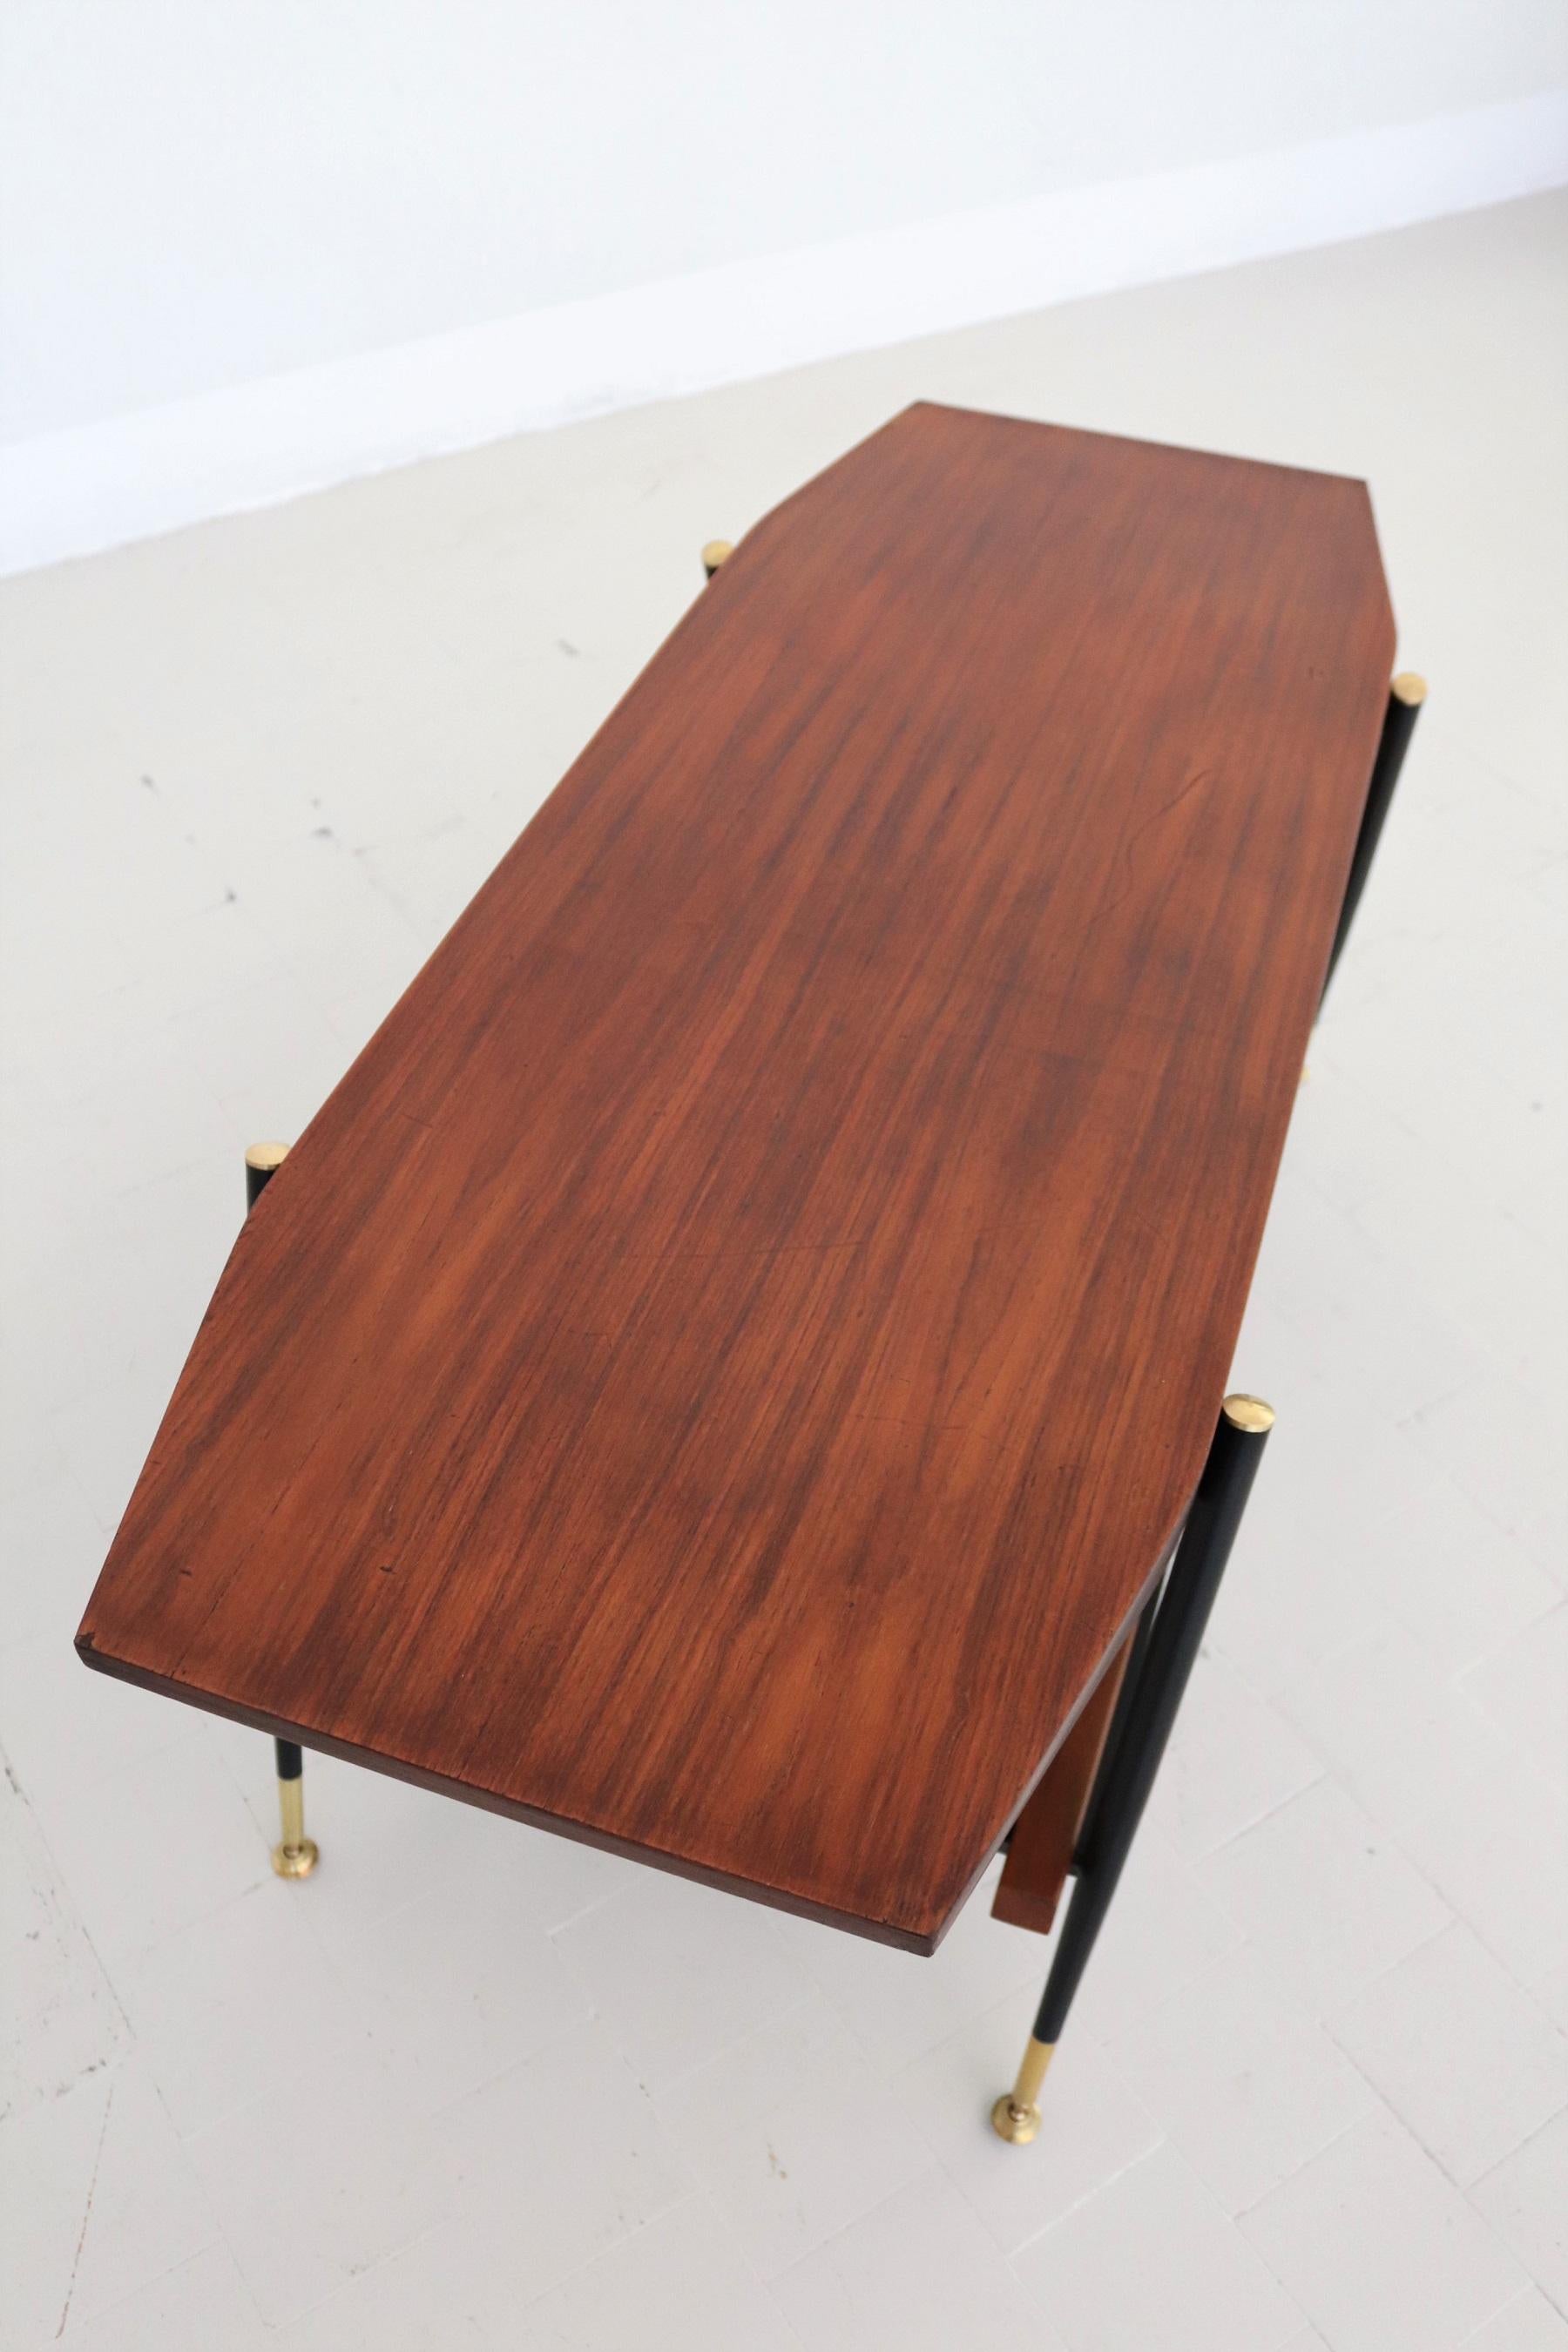 Italian Midcentury Octagonal Coffee Table in Mahogany Veneer with Brass Details For Sale 6